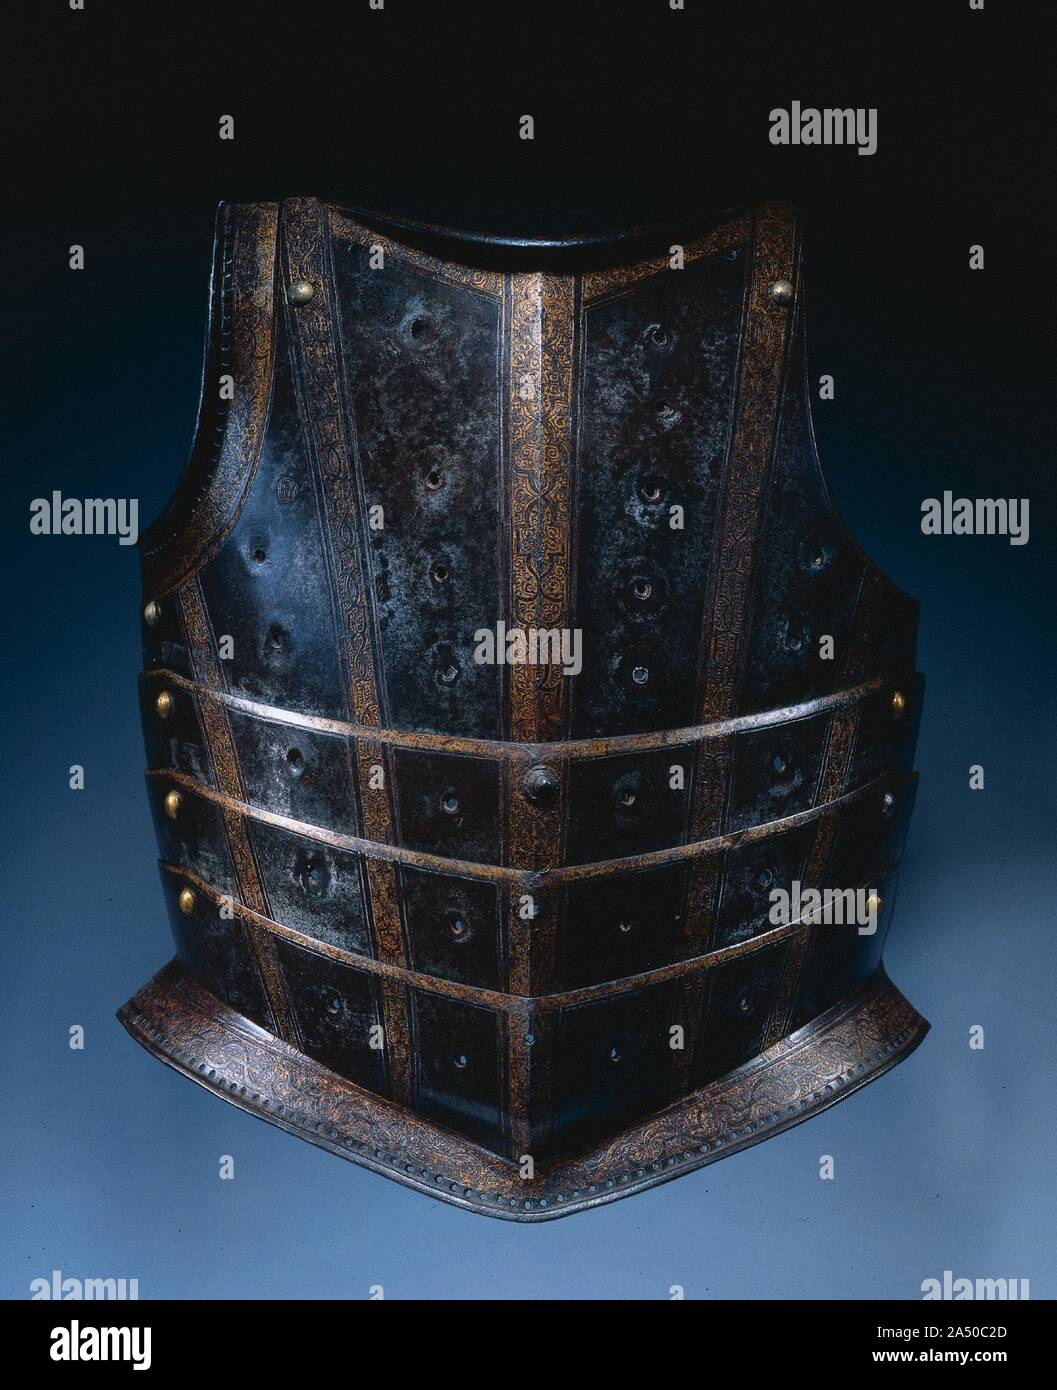 Breastplate from Hussar's Cuirass, c. 1580. This style of breastplate, with its numerous articulating lames, was probably used by a Hungarian hussar, a type of light cavalryman. The steel plates were originally blued-now turned russet-and etched and gilded with strapwork bands. The rows of vertical holes once provided gilt-brass settings for stones or glasspaste jewels. The effect would have suggested the semi-oriental costume and armor of the Near East favored by Polish and Hungarian armies of the late Renaissance. Stock Photo